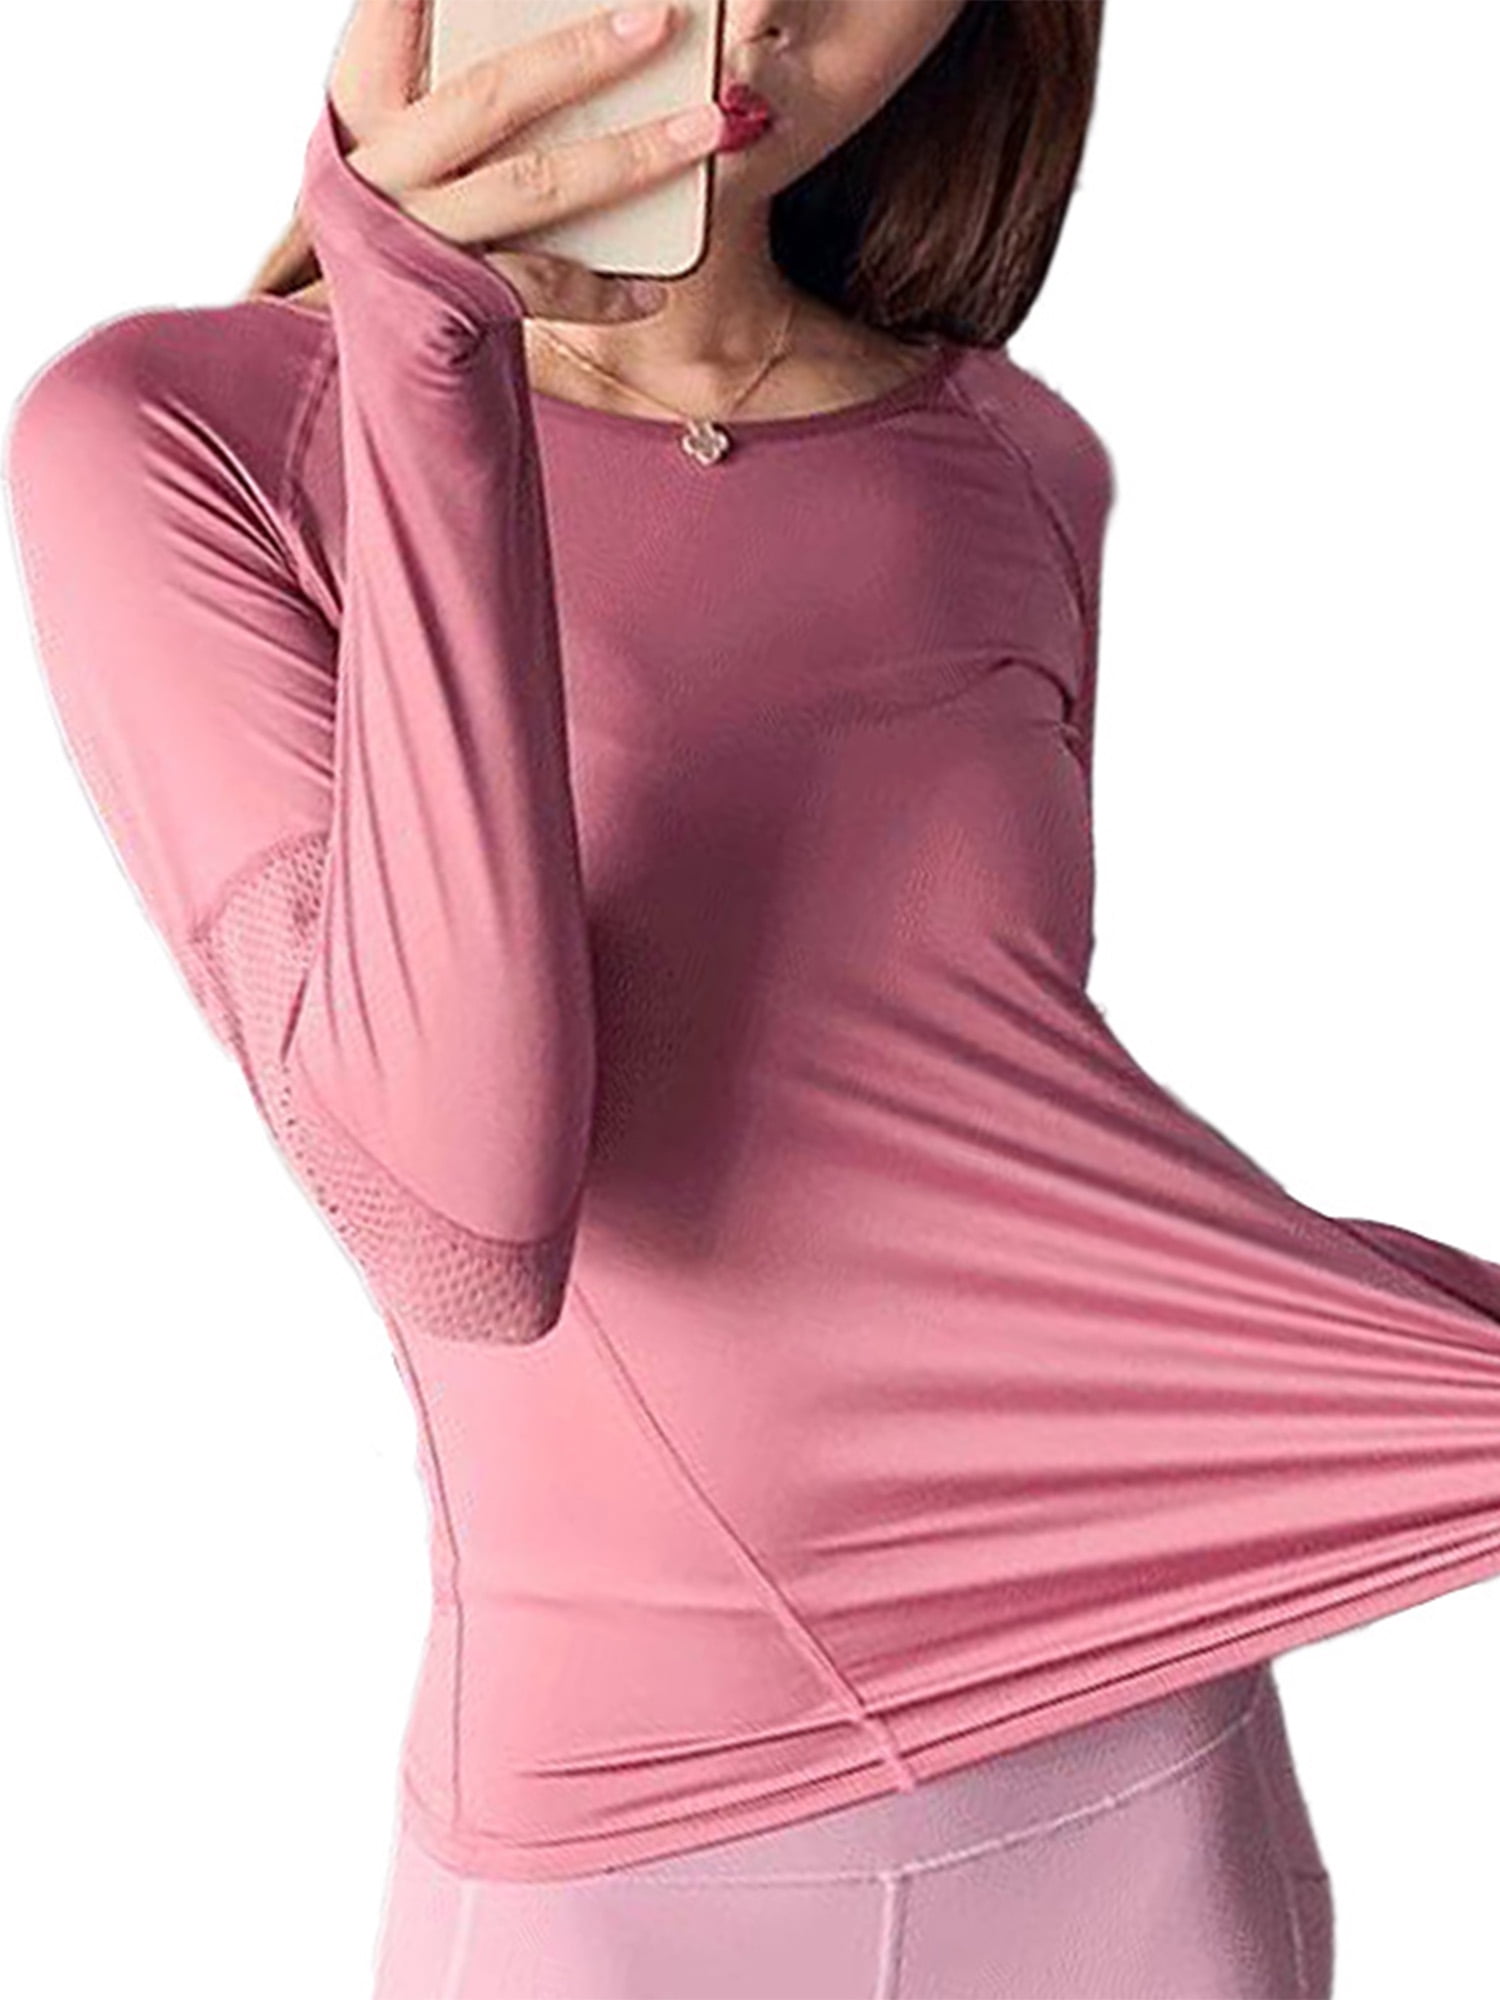  Workout Tops For Women Long Sleeve, Shirts V Neck Half Zip  Golf Pullover For Ladies Gym Training Outdoor Sports Shirts Workout Tennis  Top Pink Wave Large